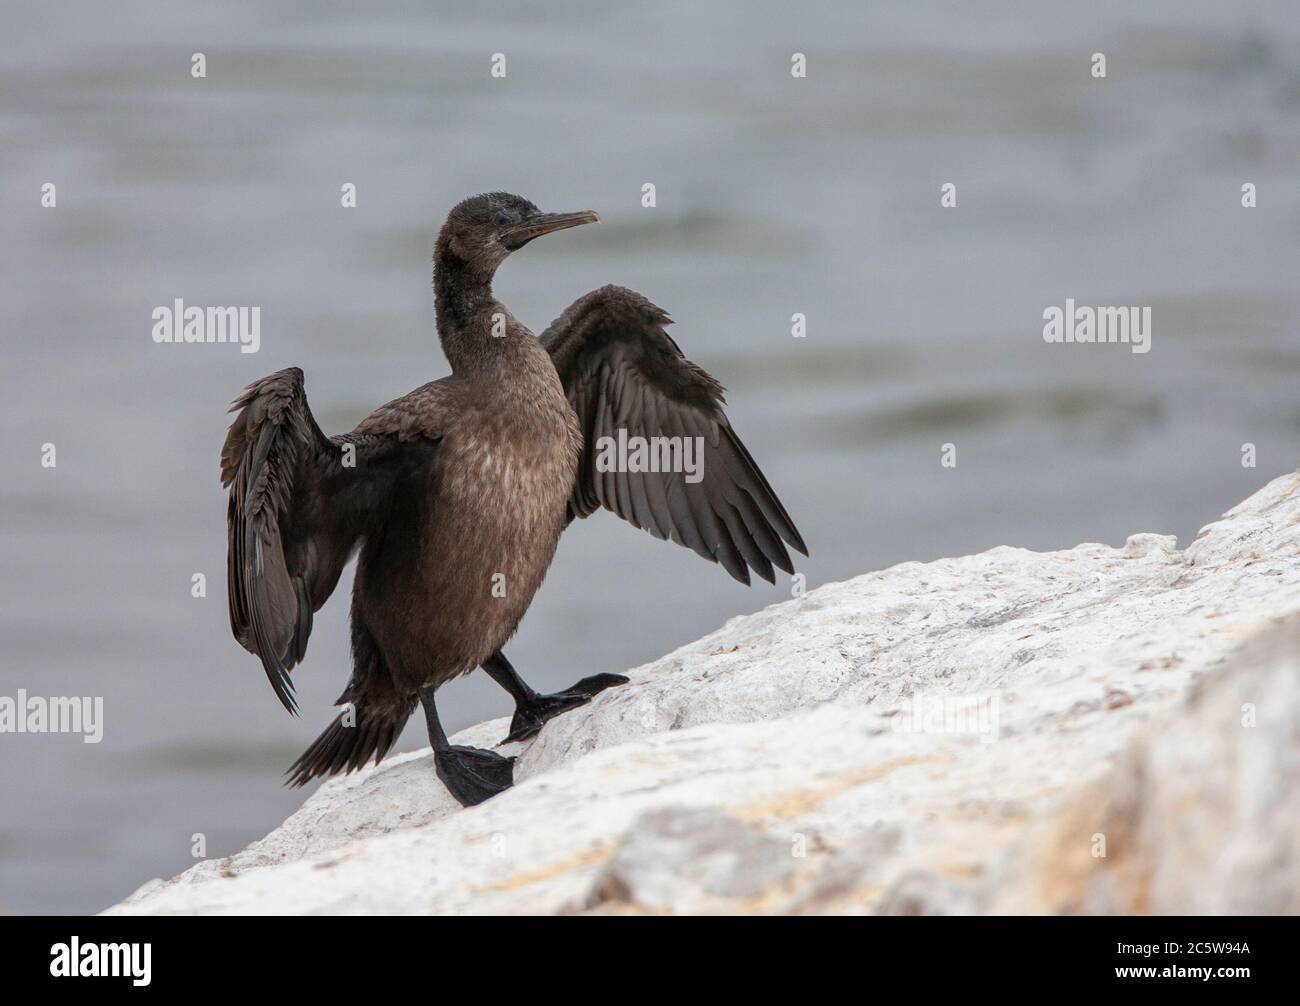 Immature Bank Cormorant (Phalacrocorax neglectus), also known as Wahlberg's Cormorant, drying its wings at Lambert's Bay, South Africa. Stock Photo